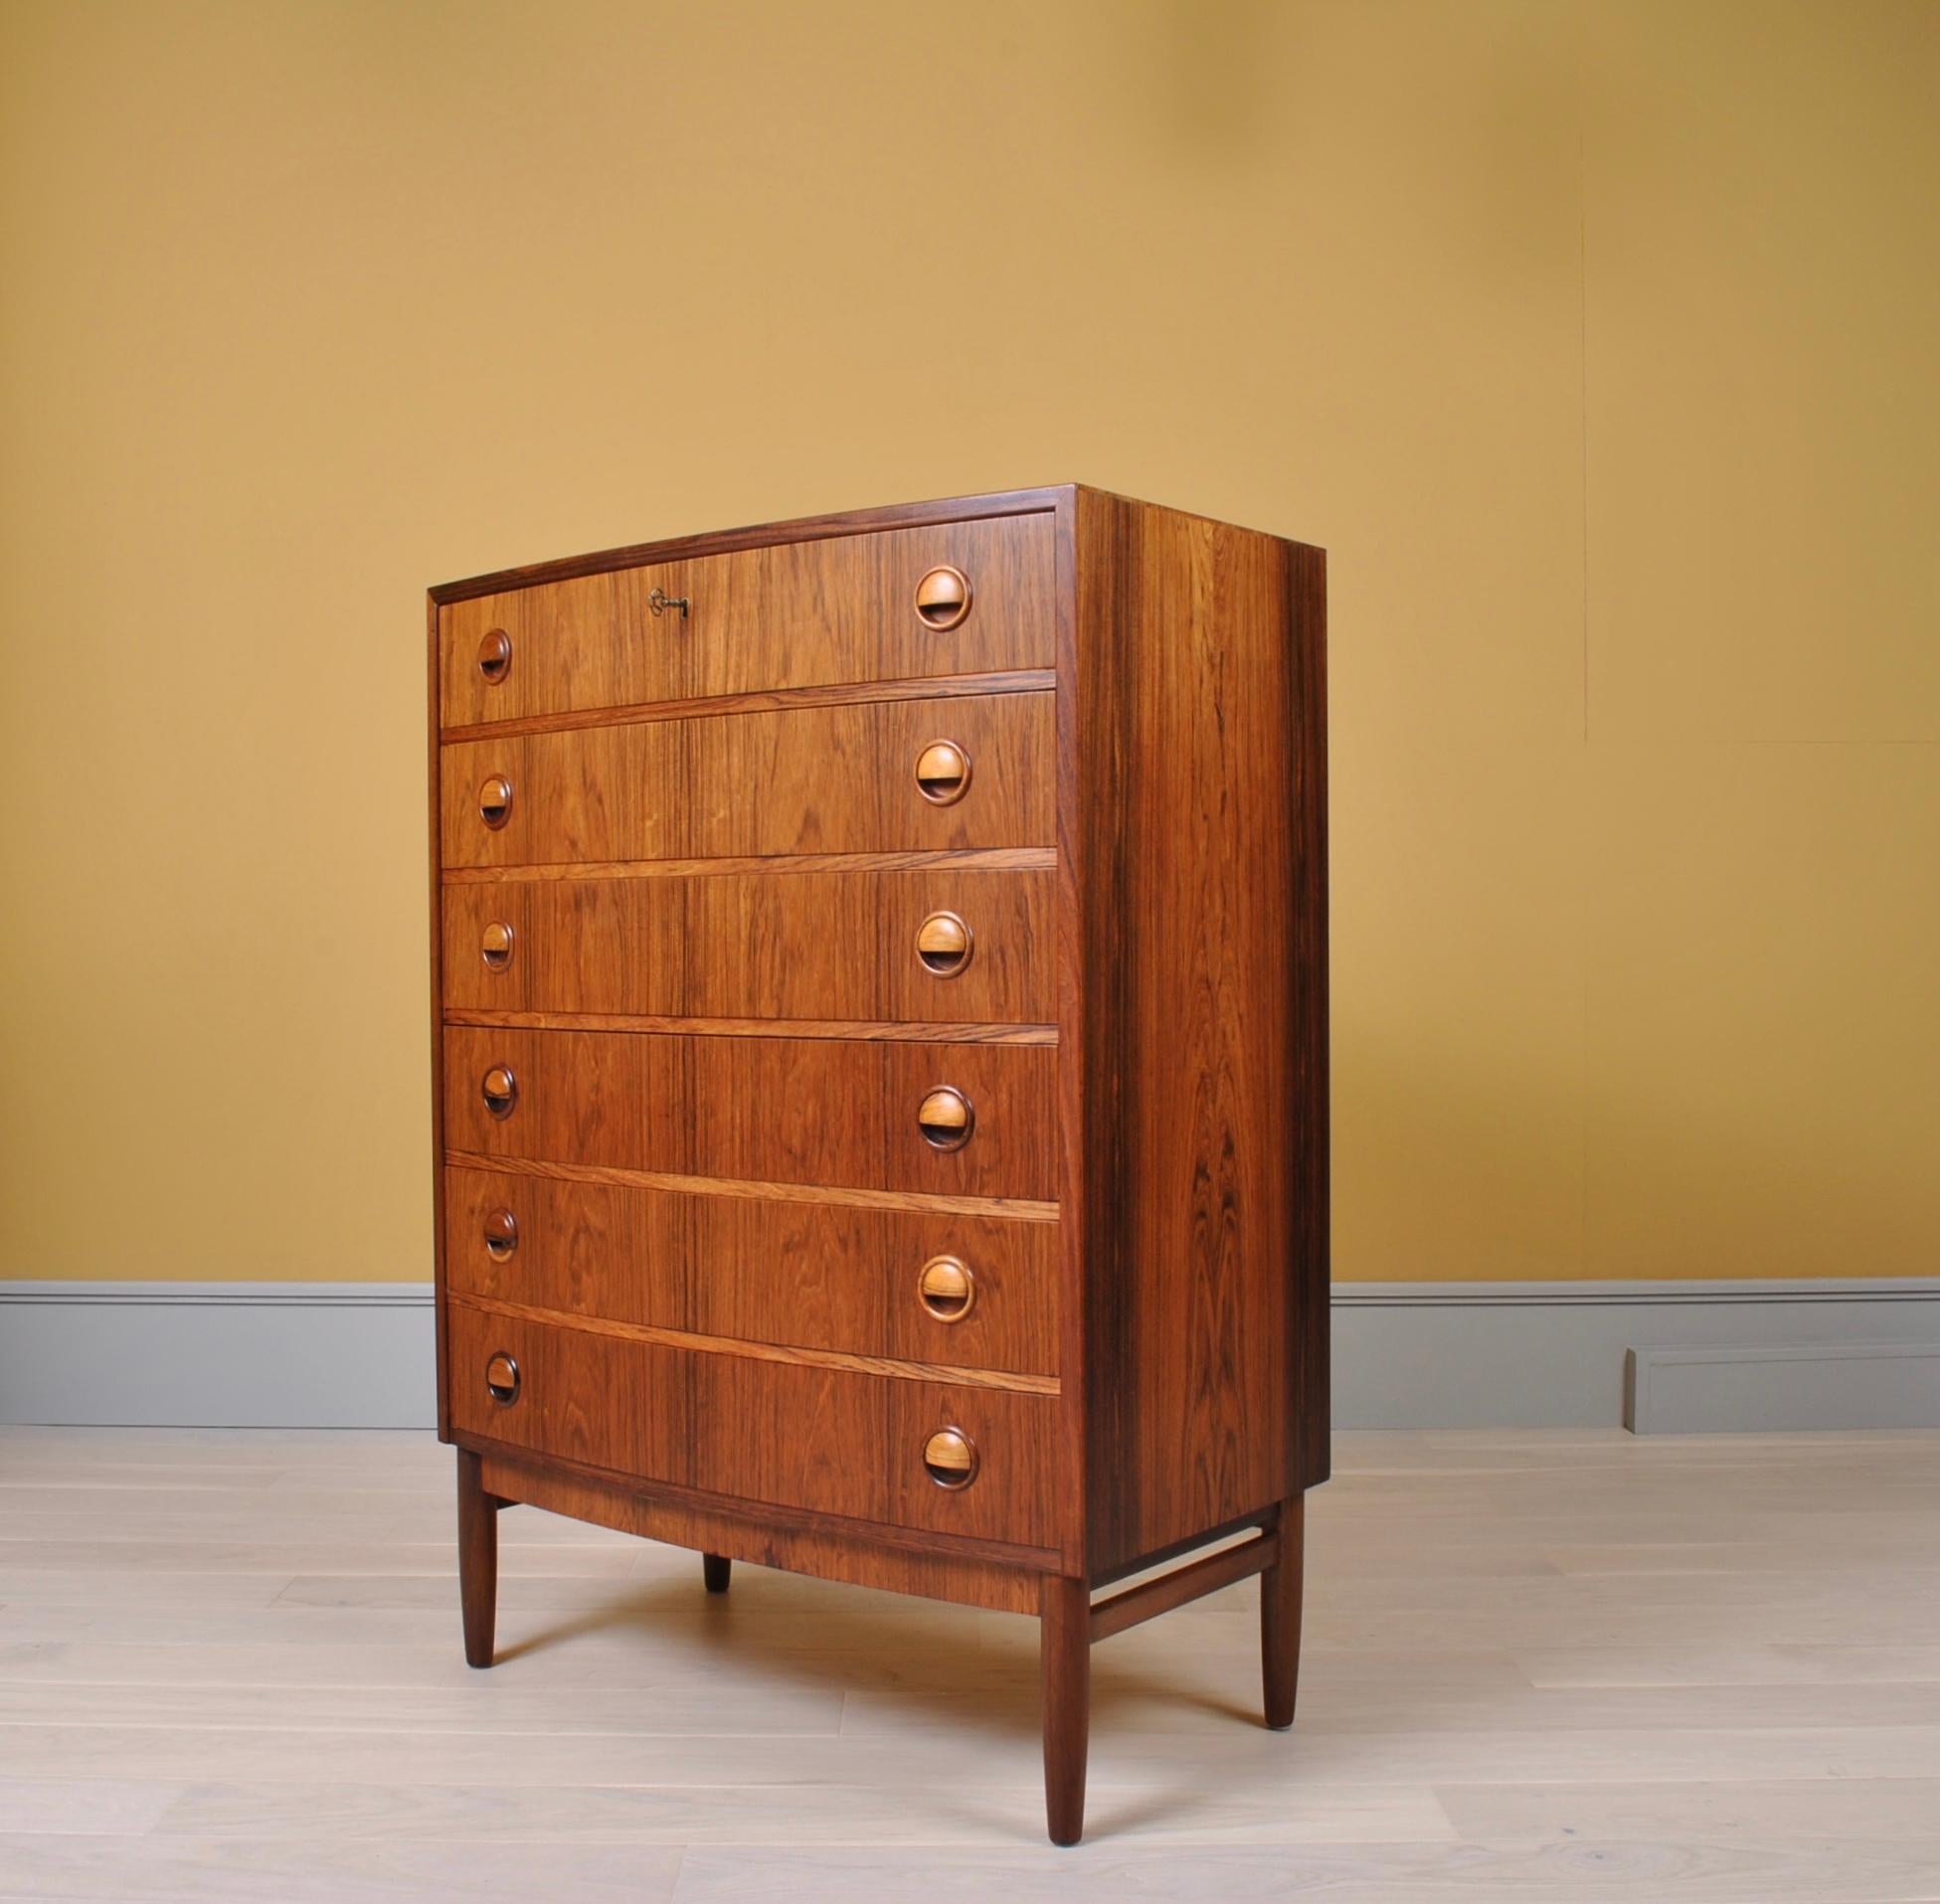 Substantial tallboy chest of drawers in rosewood. Designed by Kai Kristiansen and produced in Denmark in the late 1950s. Lockable top drawer. An elegant Midcentury piece and extremely practical.